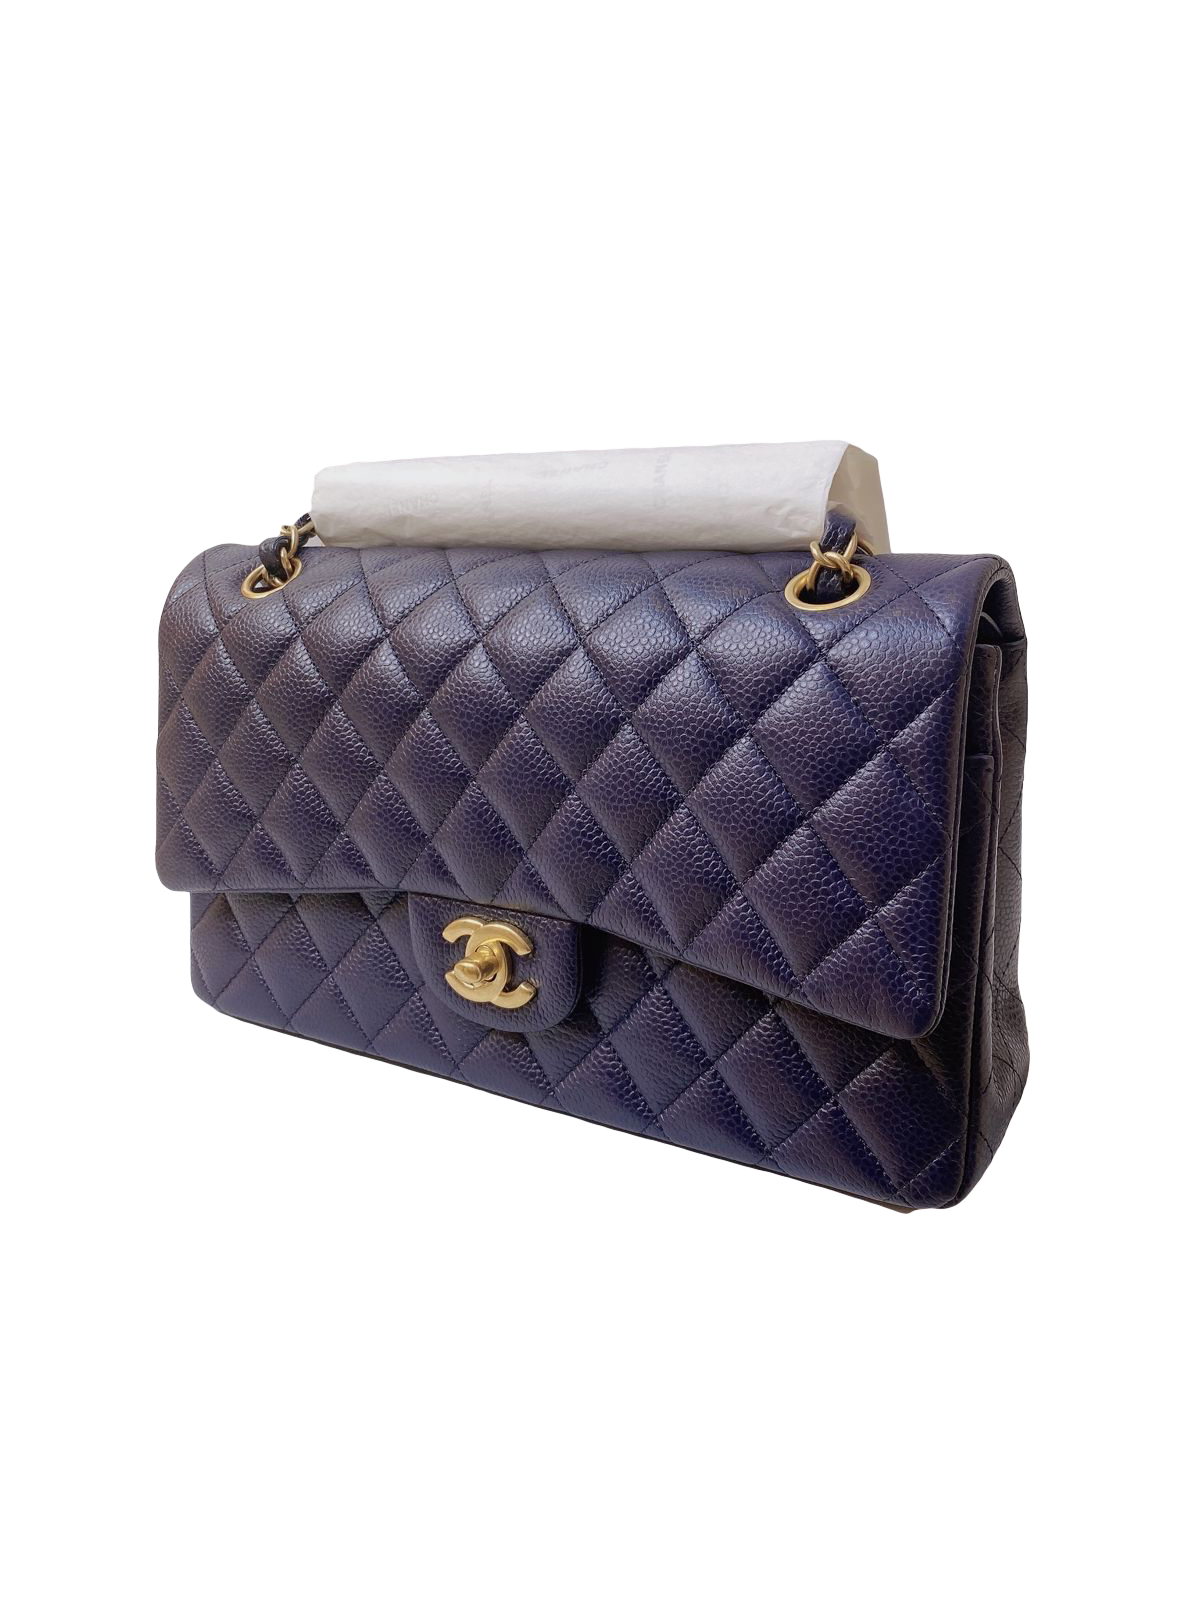 Timeless/classique leather handbag Chanel Navy in Leather - 35731452